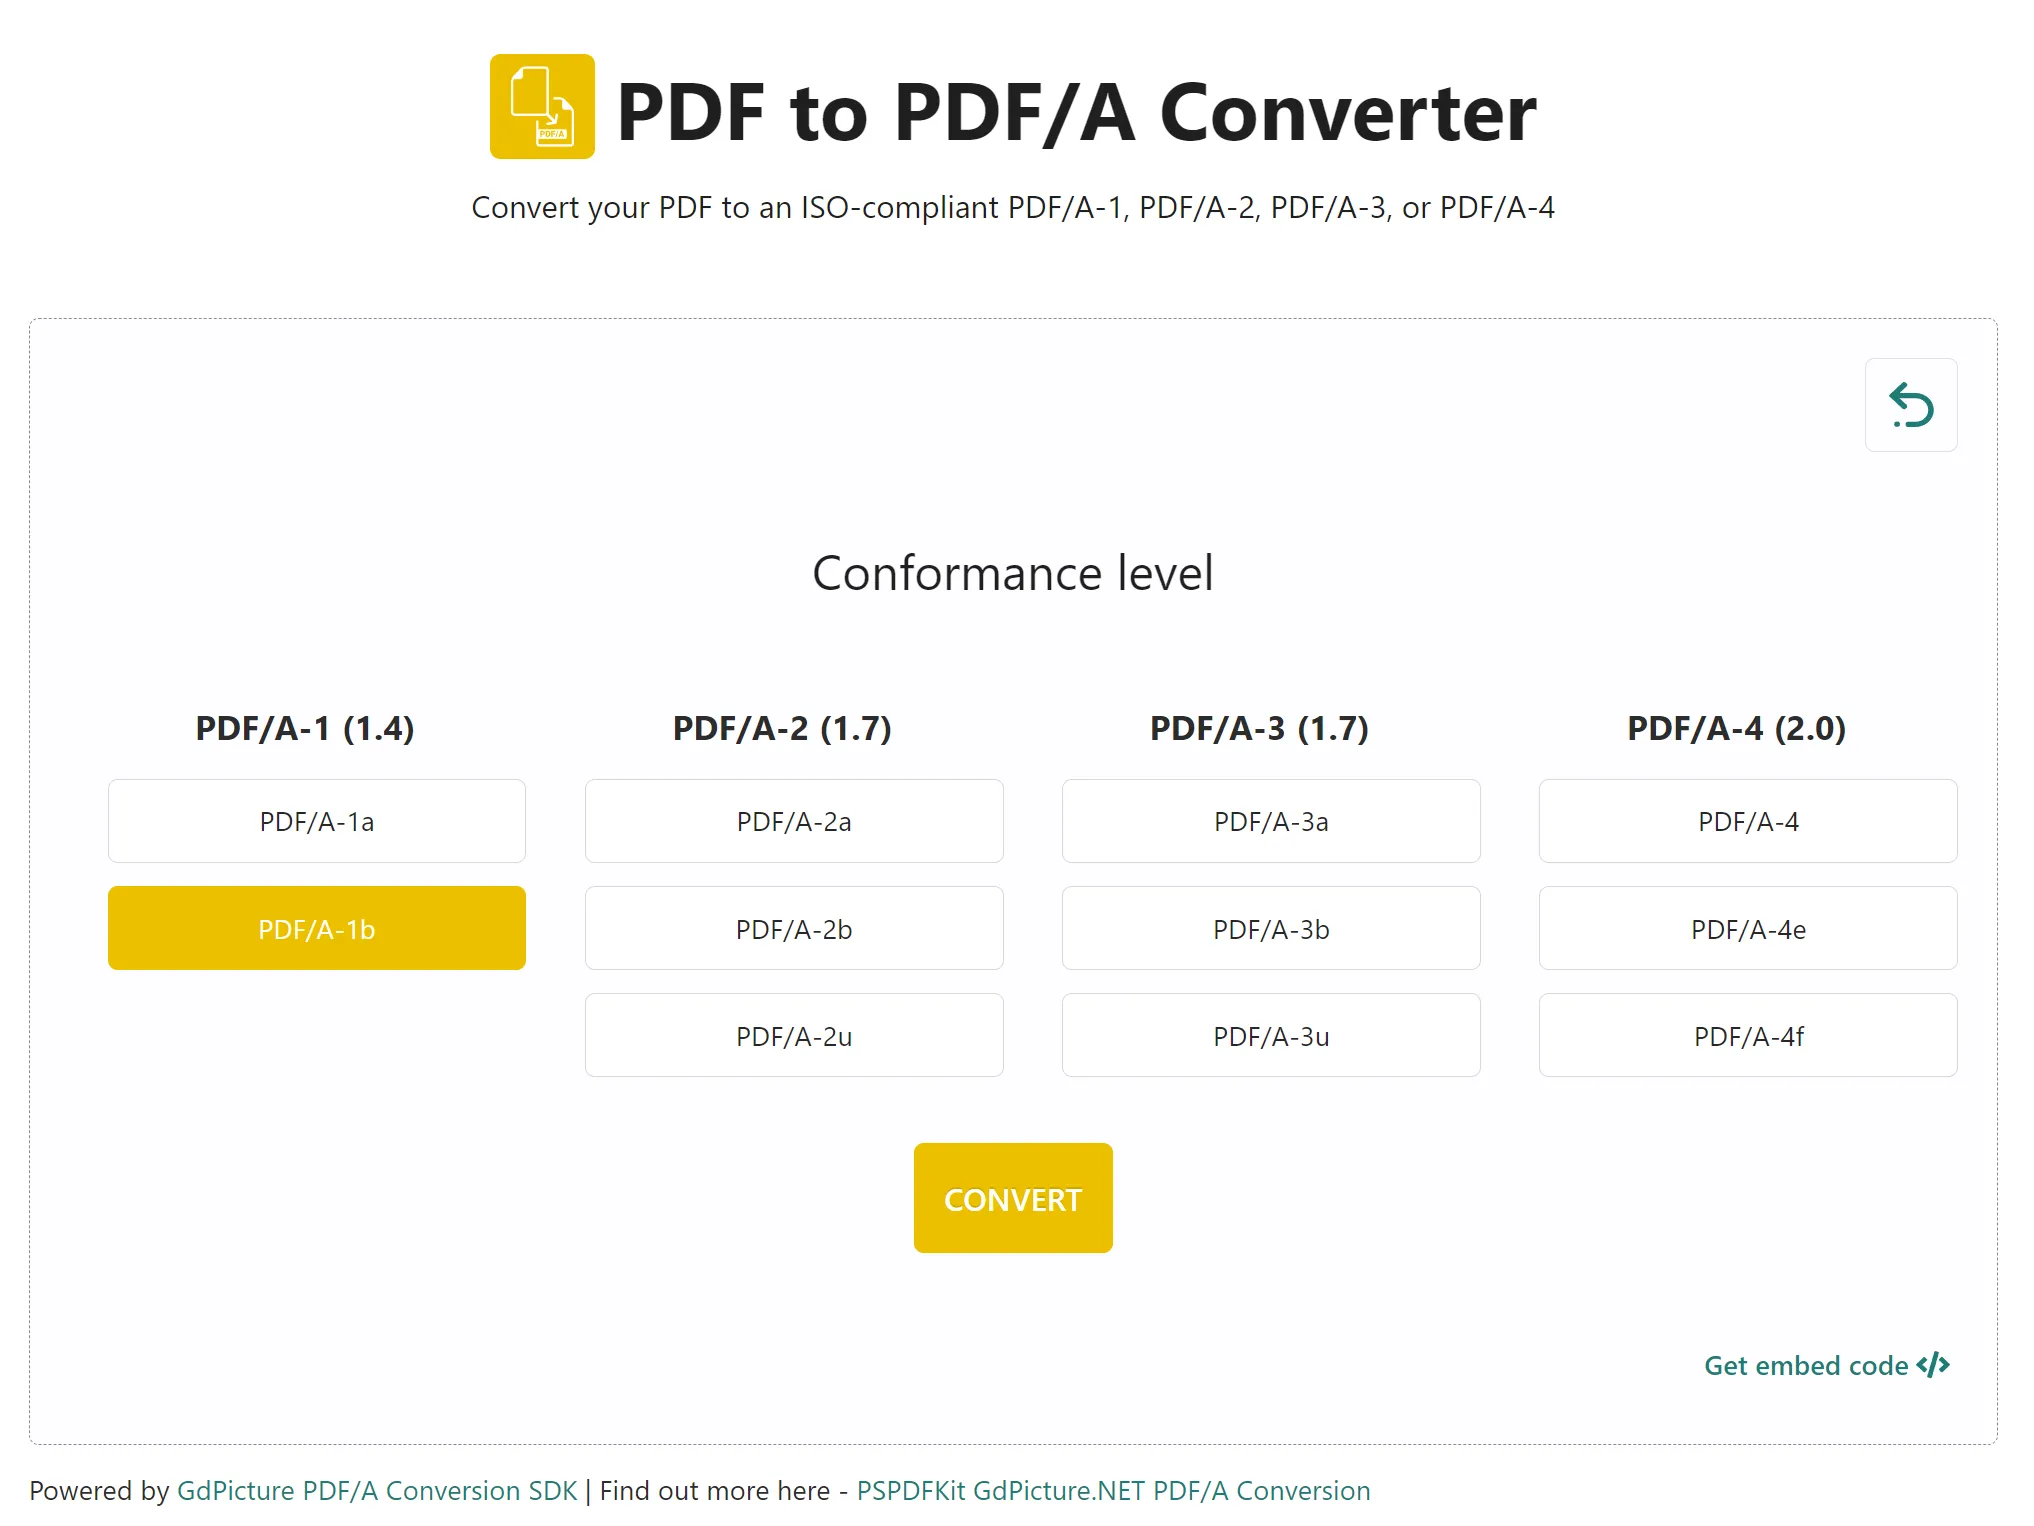 Select the PDF/a format to convert to PDF/A format